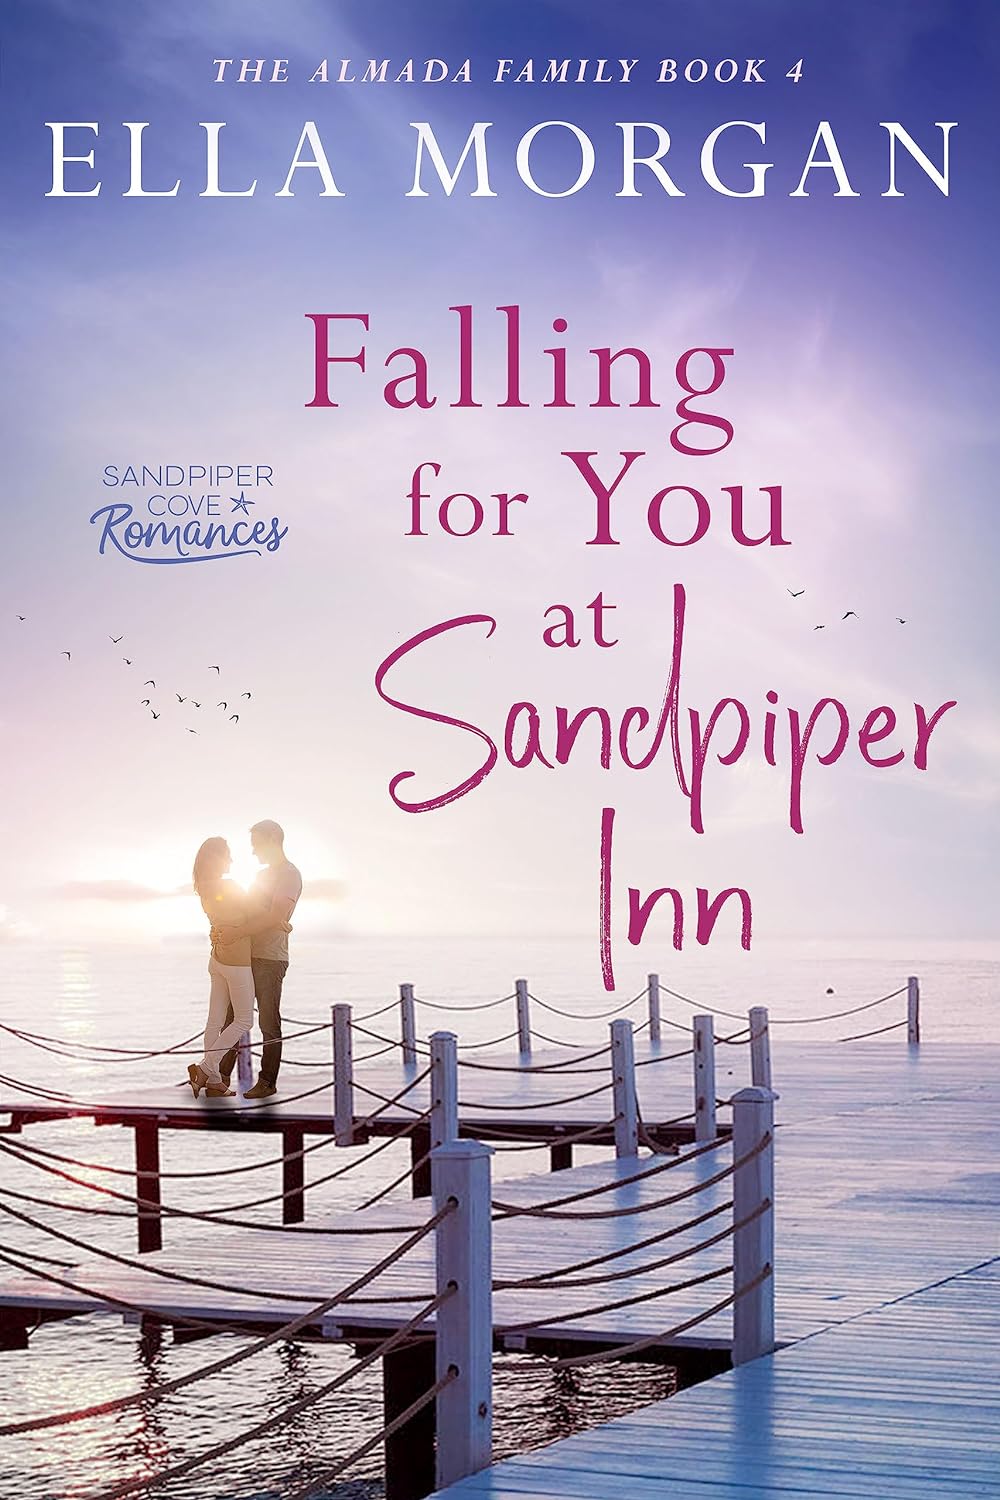 Falling for You at Sandpiper Inn Boss Employee Sweet Romance by Bestselling Author Ella Morgan